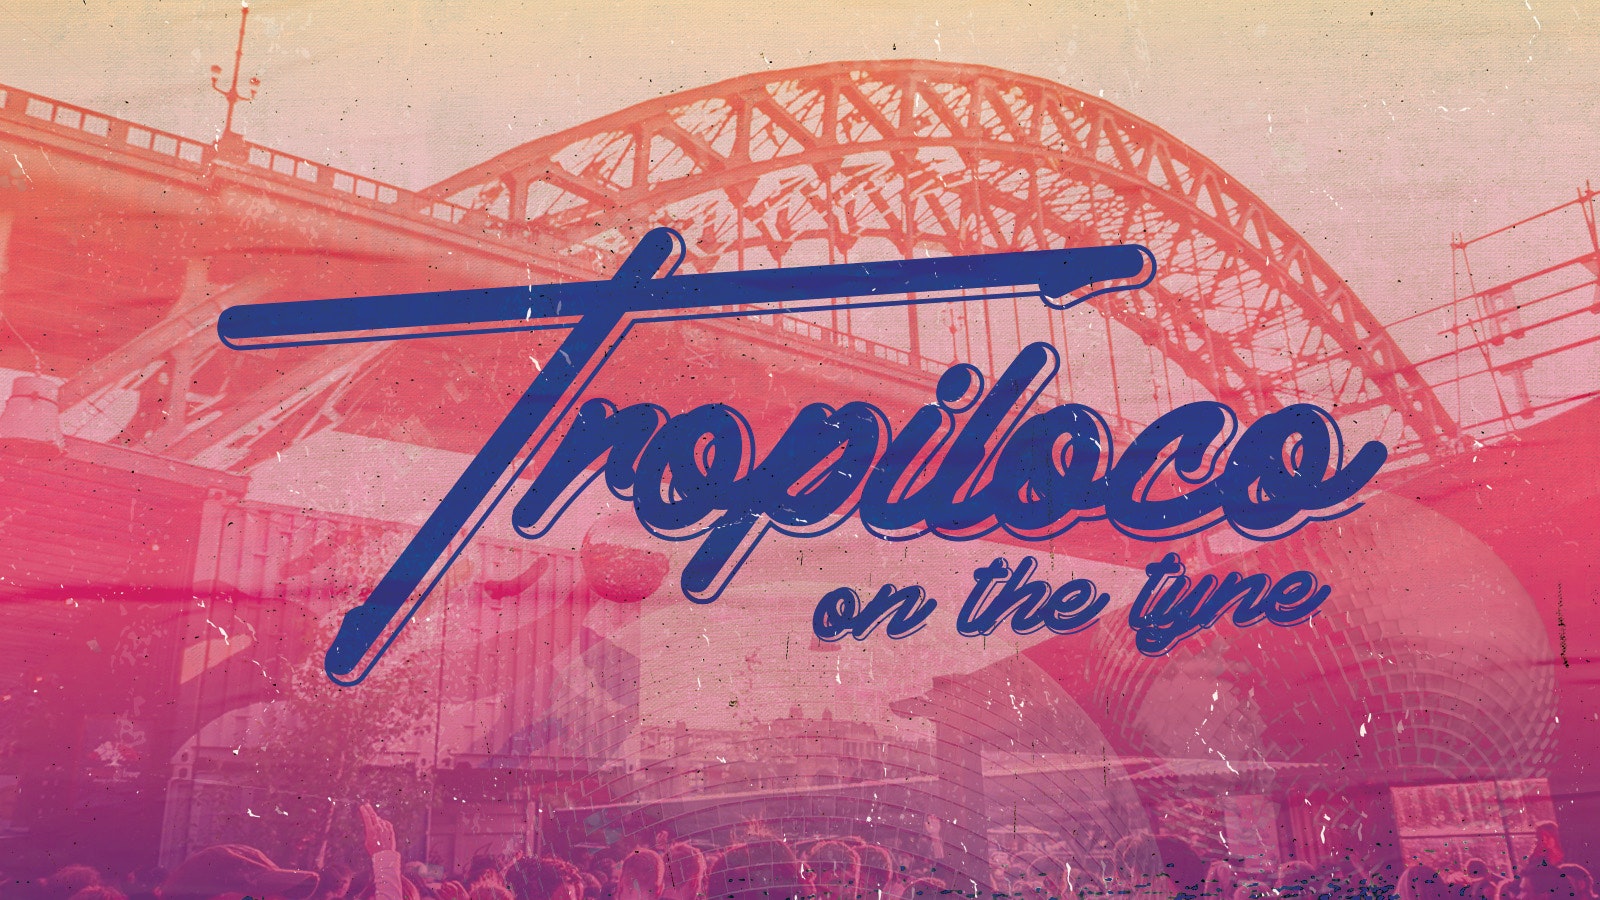 TROPILOCO ON THE TYNE ☀️🌊 FINAL 45 TICKETS! // HWKRLAND // 6-11pm – 22nd April